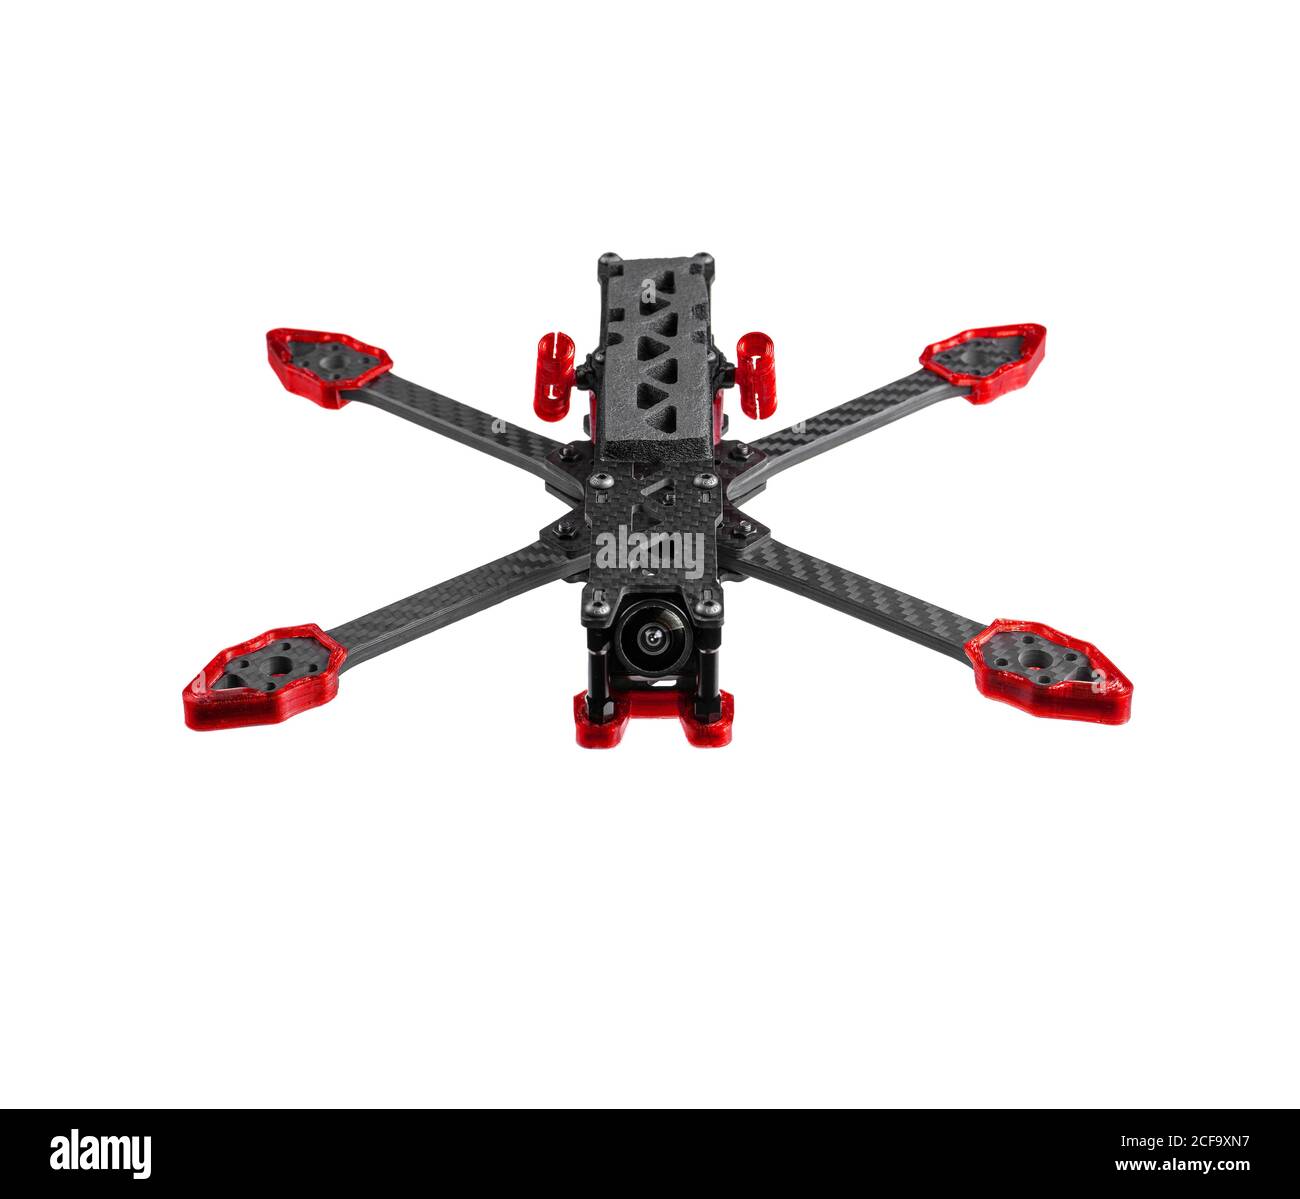 Carbon frame for FPV racing drone isolate on white background. Assembling the quadcopter. Stock Photo